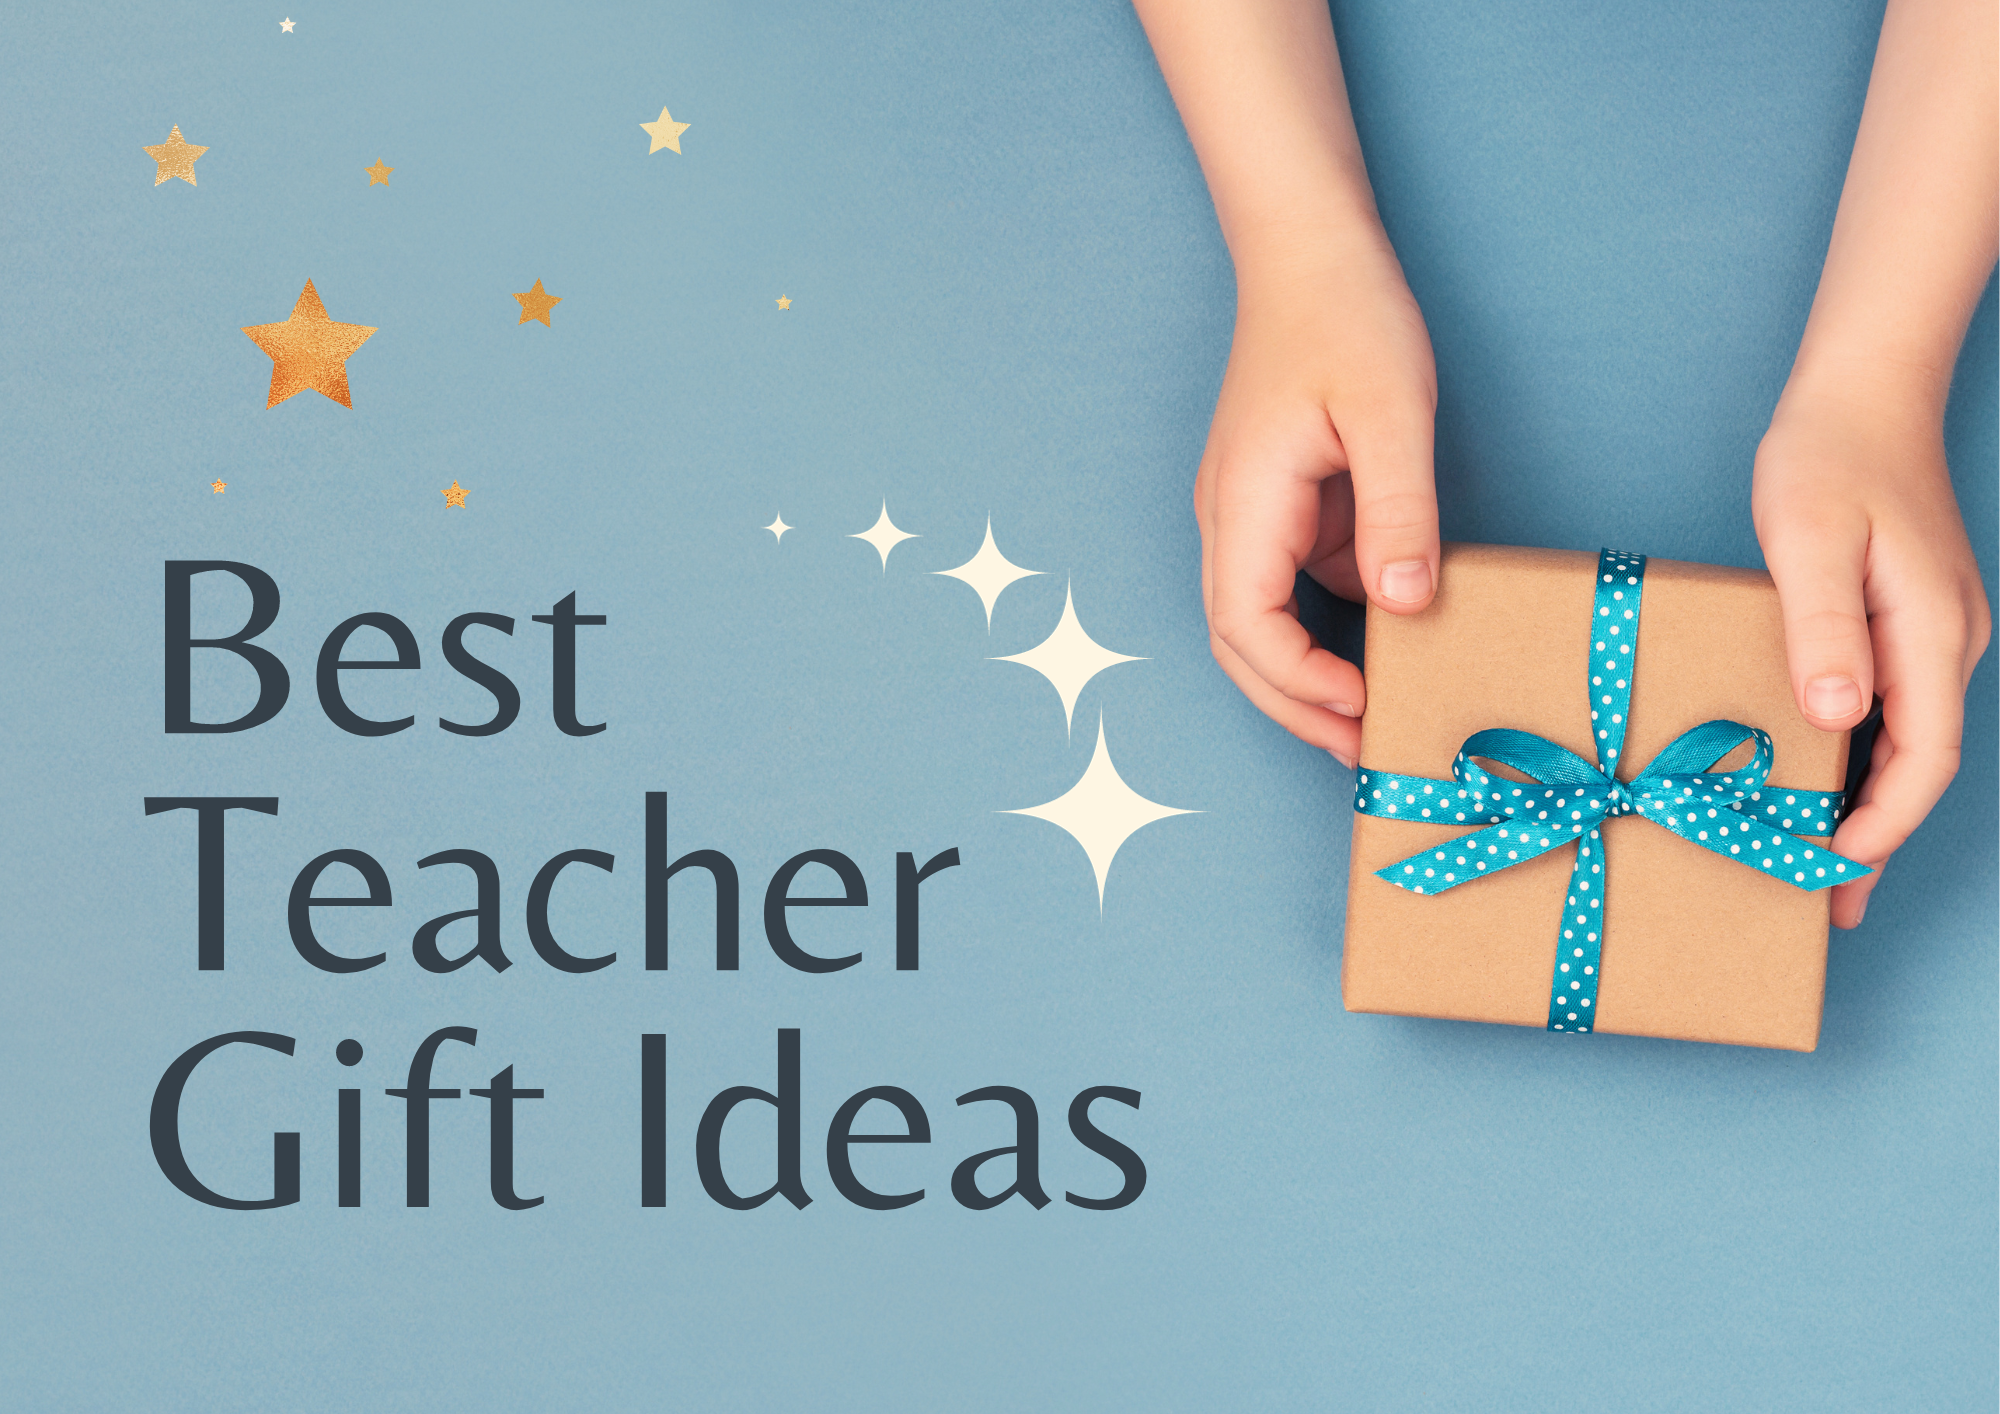 Buy Teacher's Day Gifts Online with Upto 50% off | Order Now!